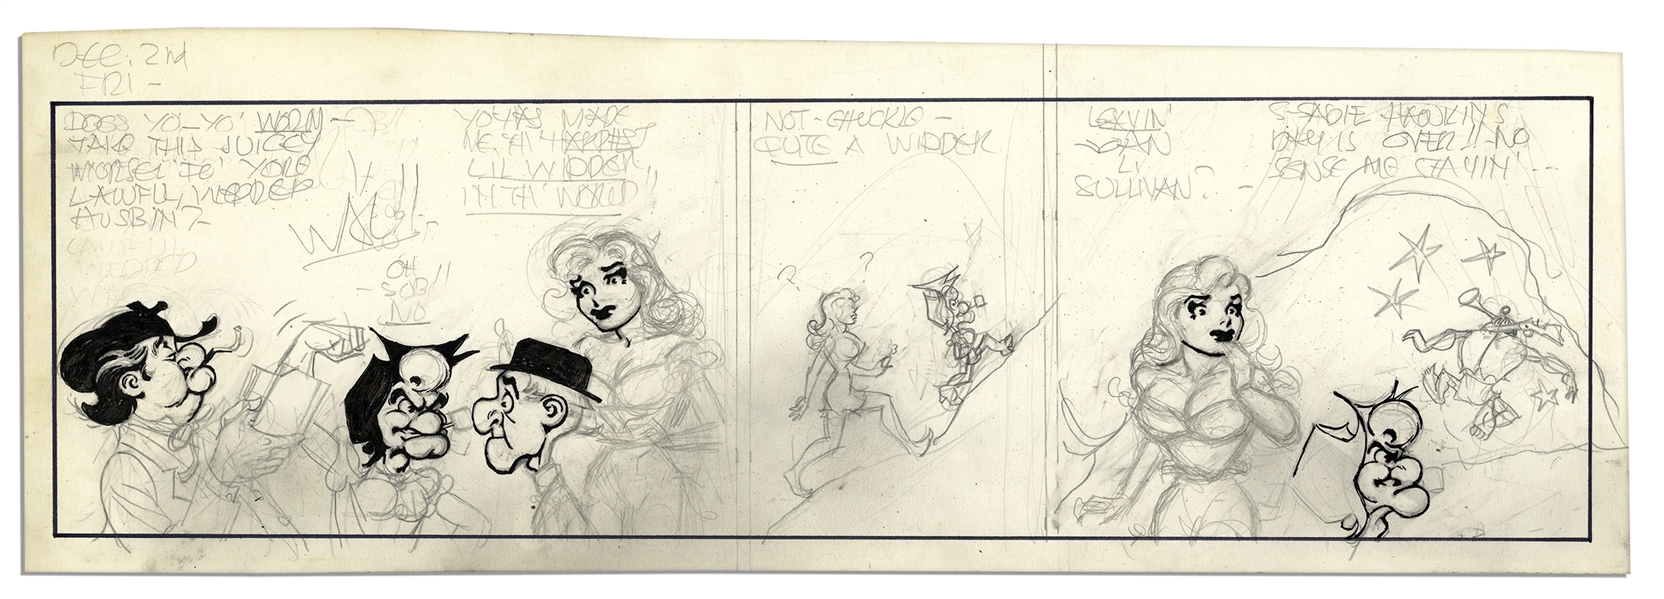 Al Capp ''Li'l Abner'' Unfinished Hand-Drawn Comic Strip -- Featuring Daisy Mae & Mammy Yokum -- Measures 18.75'' x 6.25'' in Pencil & Ink -- Very Good -- From the Al Capp Estate